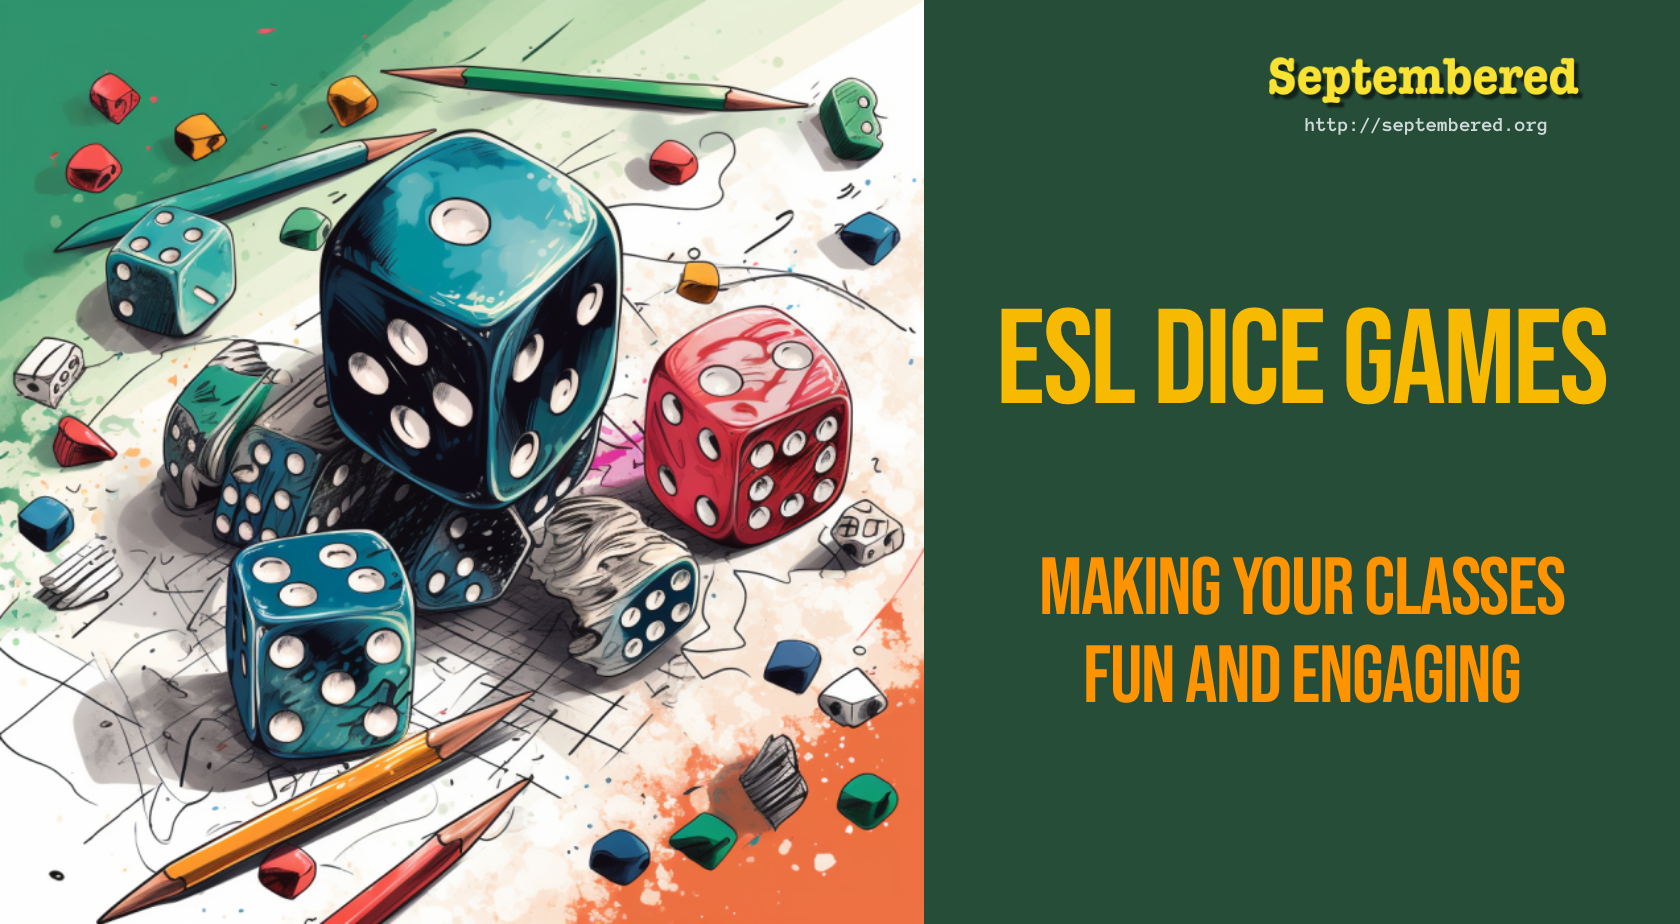 ESL Dice Games: Making Your Classes Fun and Engaging